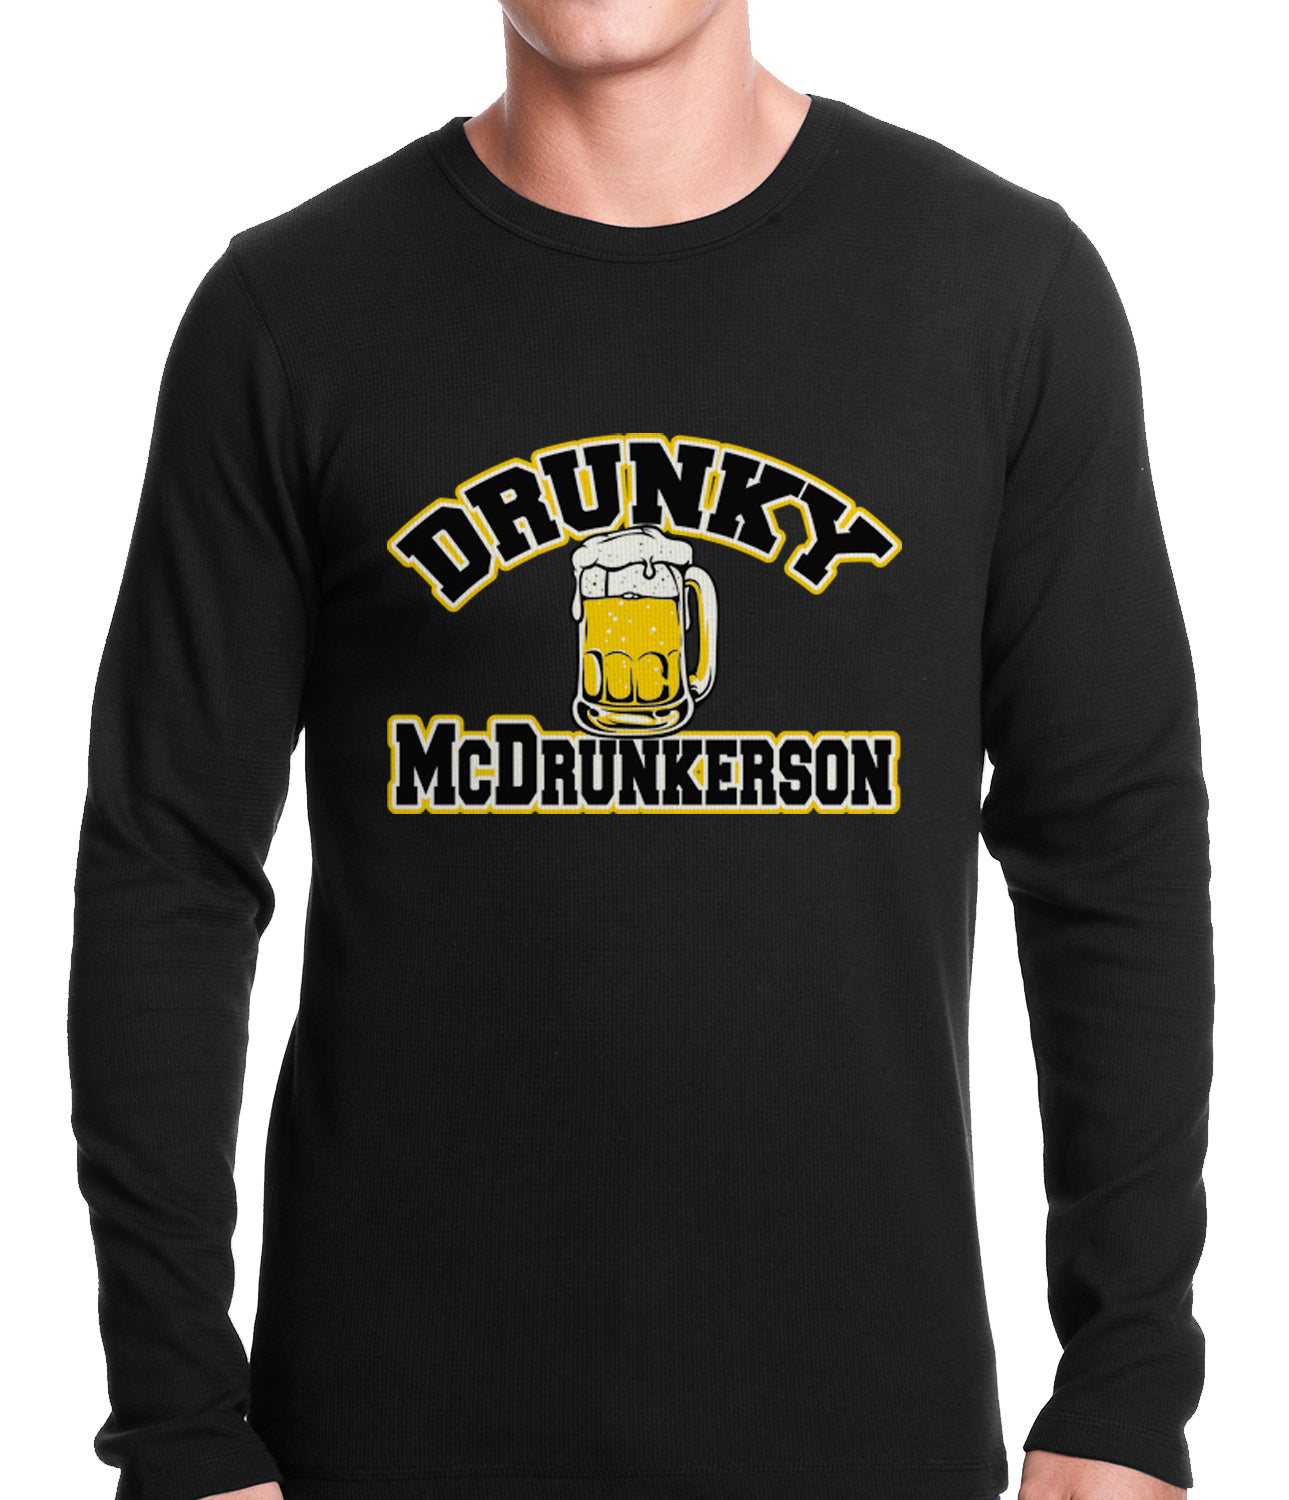 Drunky McDrunkerson Funny Thermal Shirt